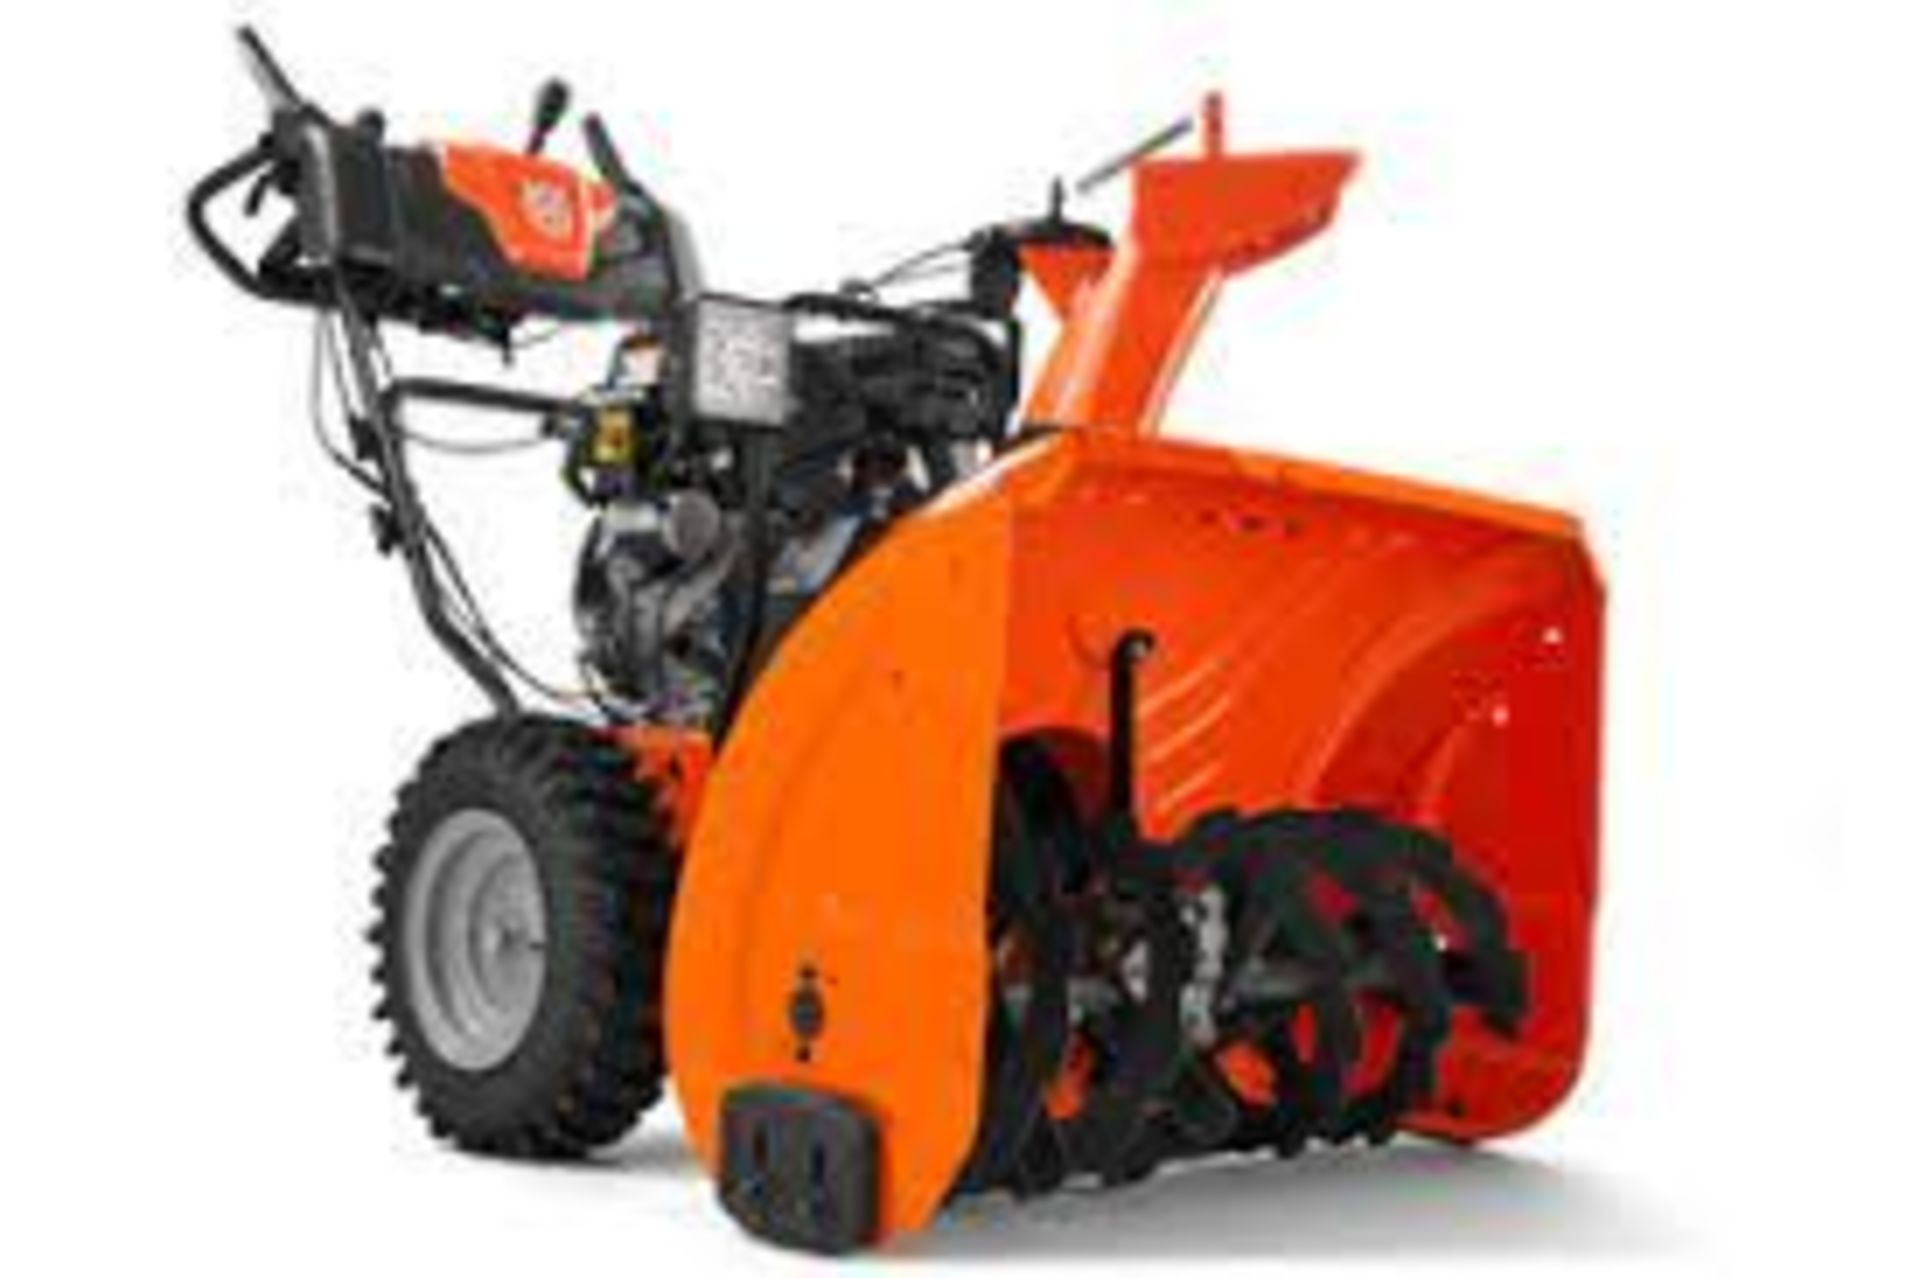 Husqvarna ST 230P Self Propelled Snow Blower - Approx. MSRP $1299 - Image 2 of 5